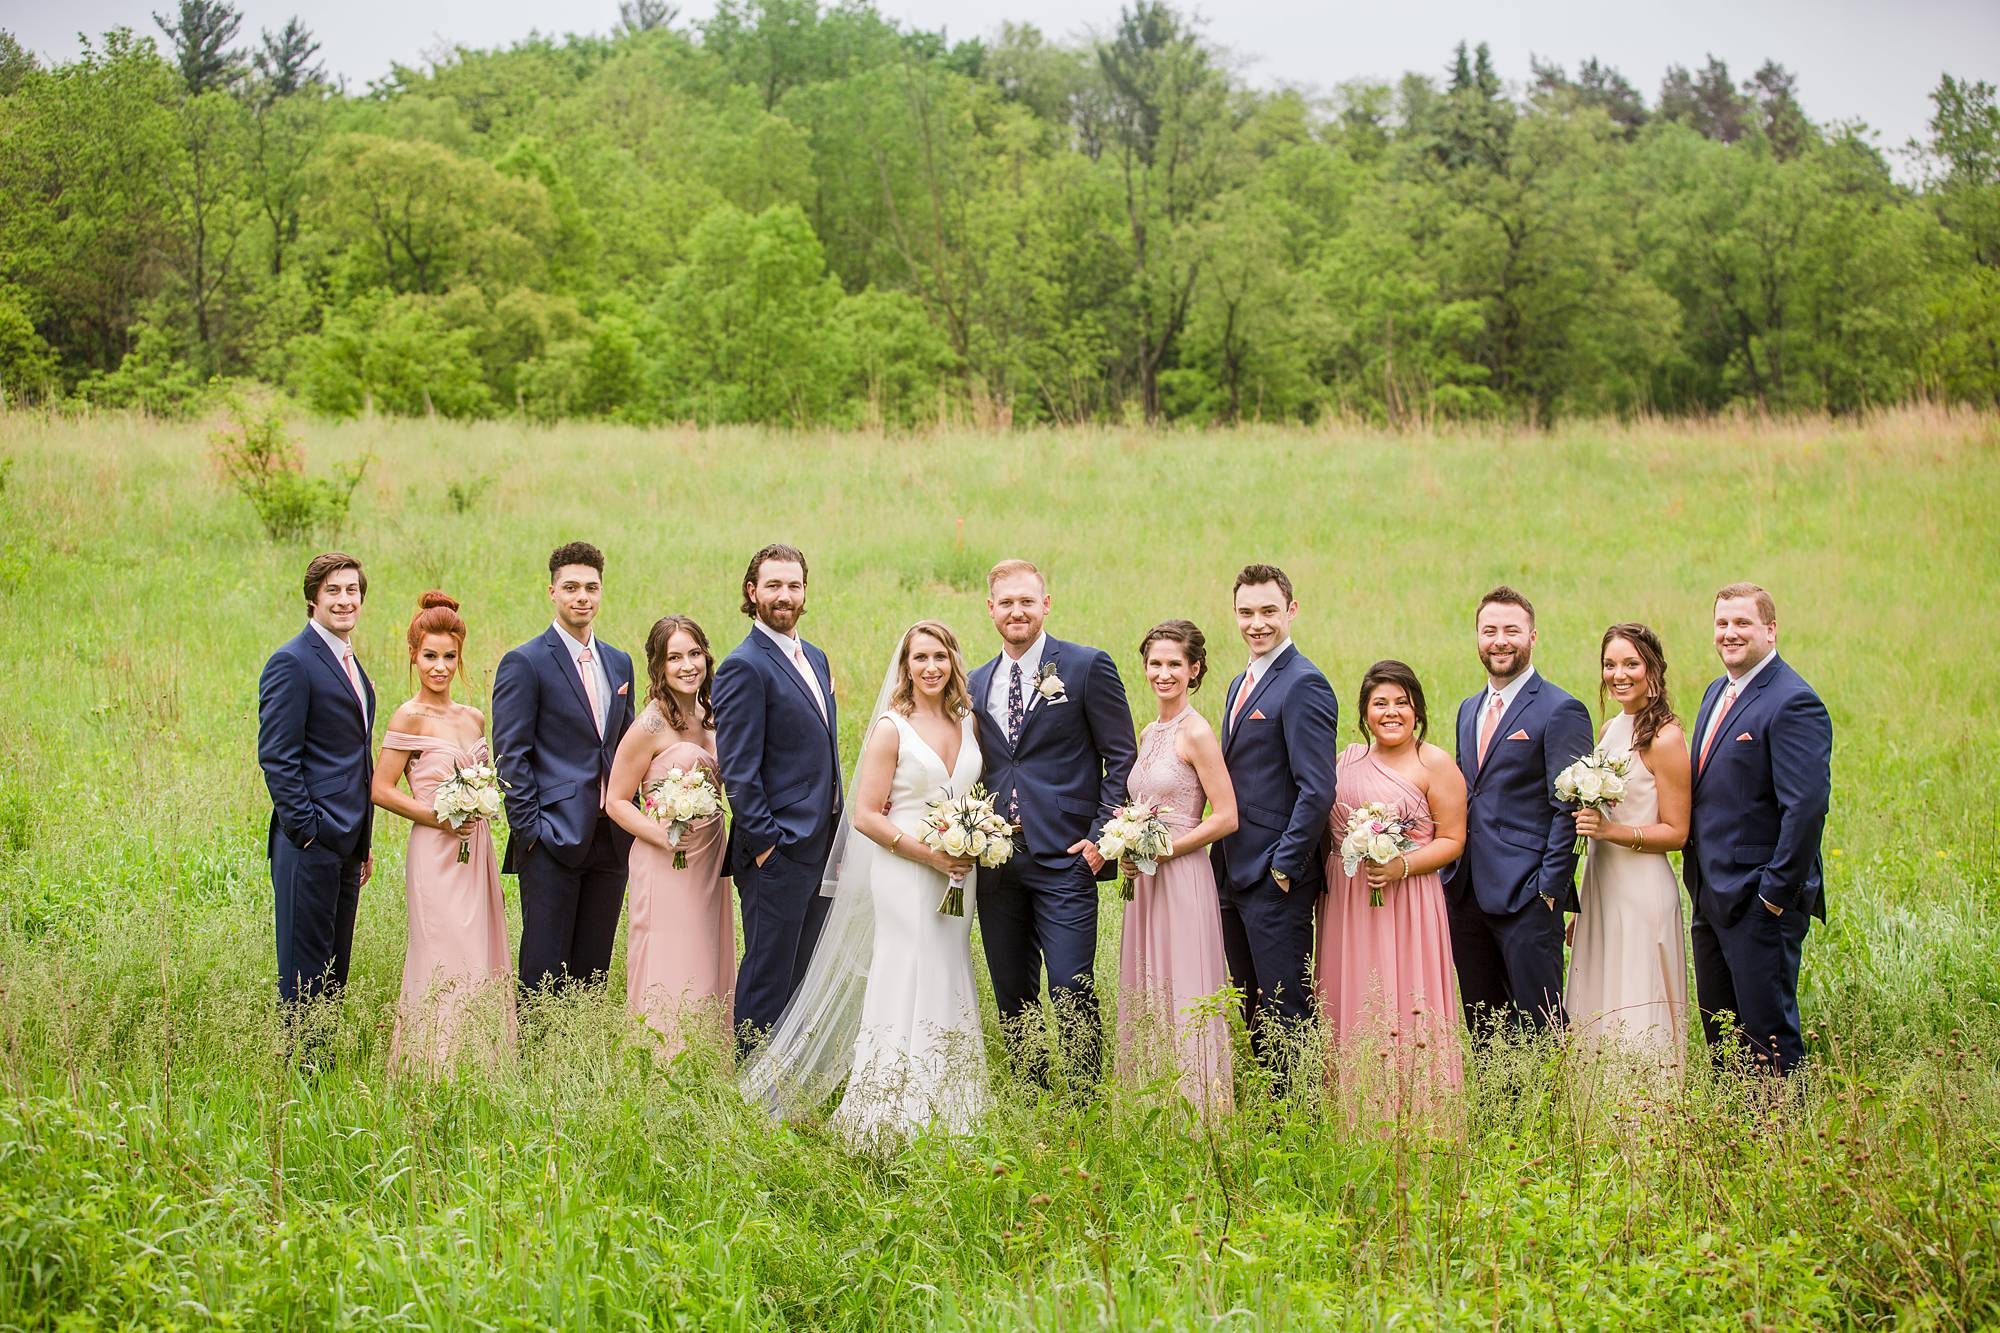 Fenner Nature Center wedding photographs with bridal party